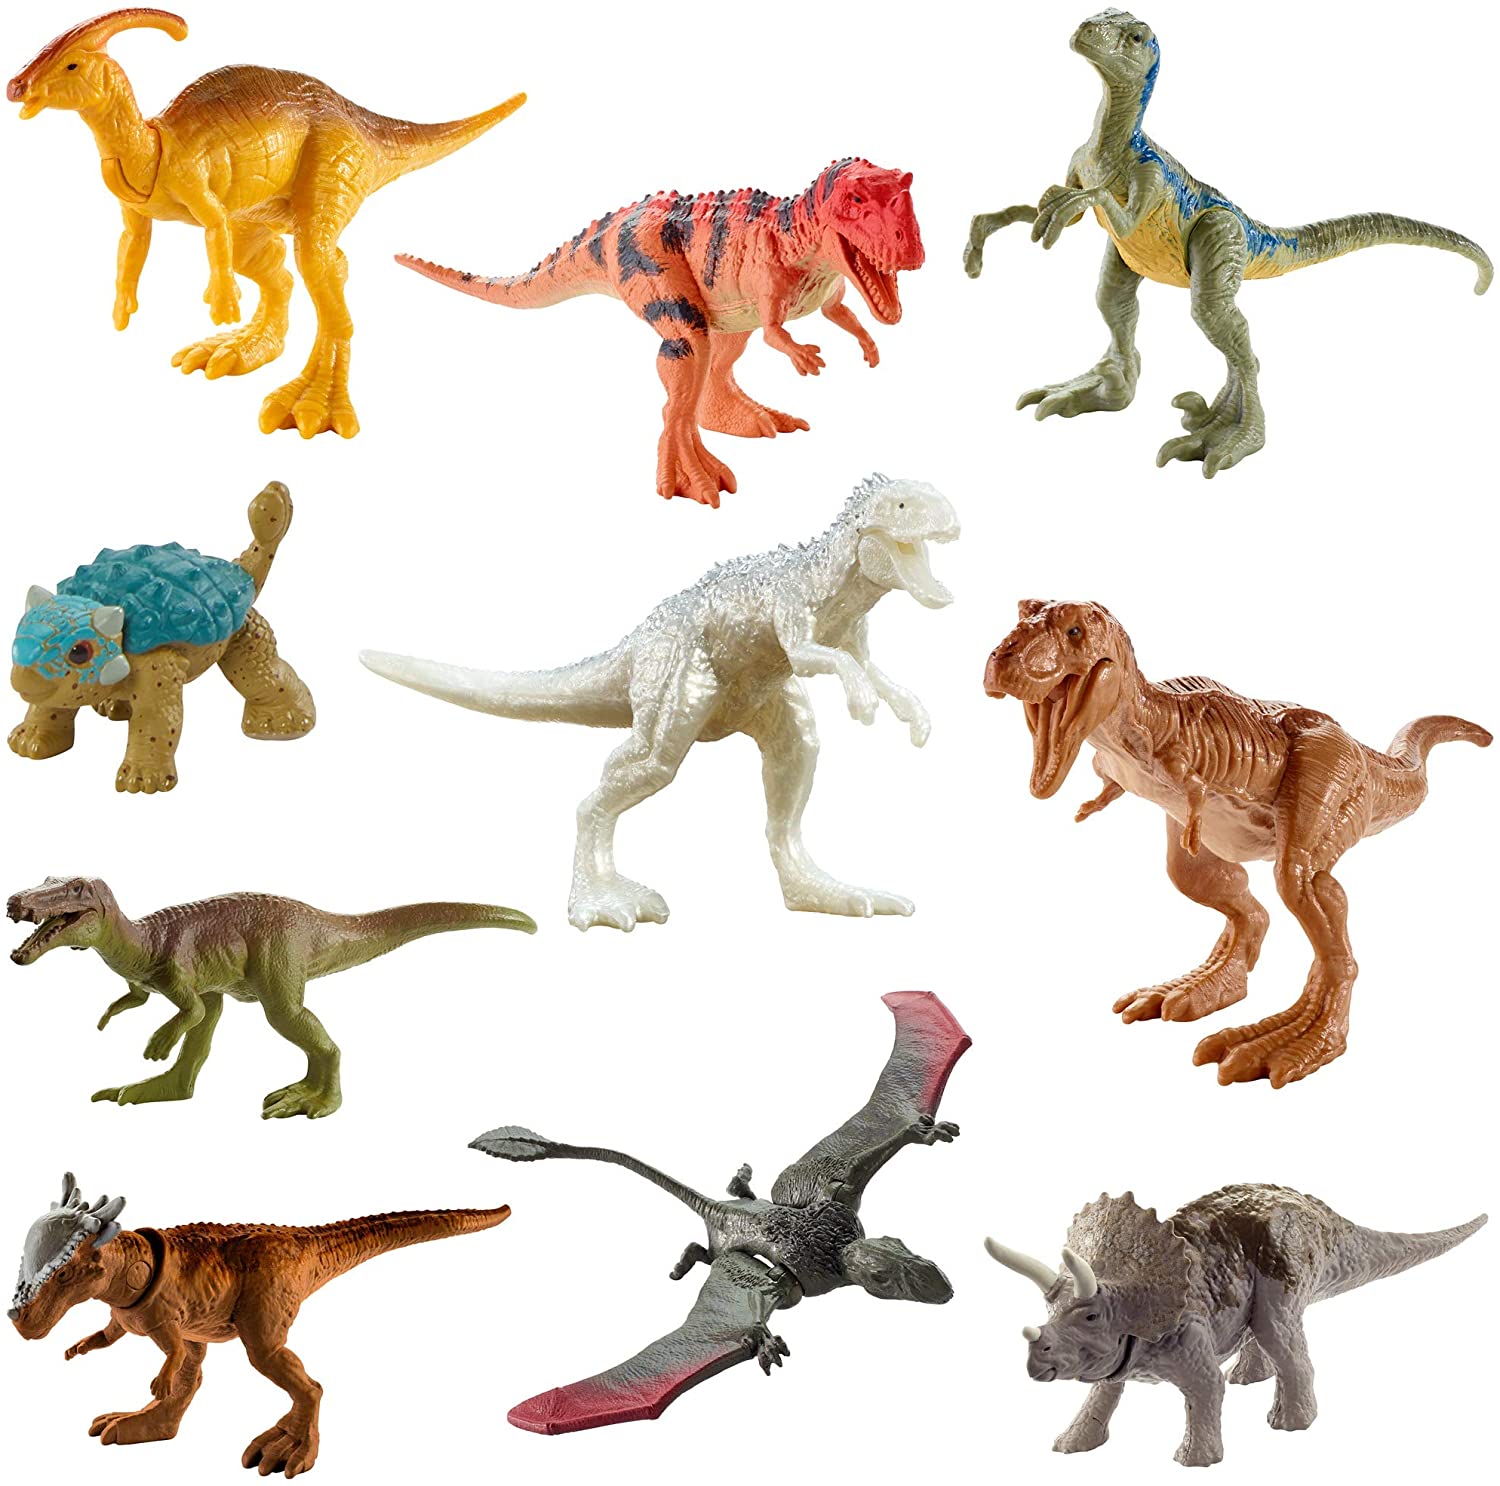 Jurassic World Camp Cretaceous Isla Nublar Multipack Featuring 10 Mini Dinosaur Action Figures with Realistic Sculpting, Authentic Decoration Movable Articulation Points: Toys & Games